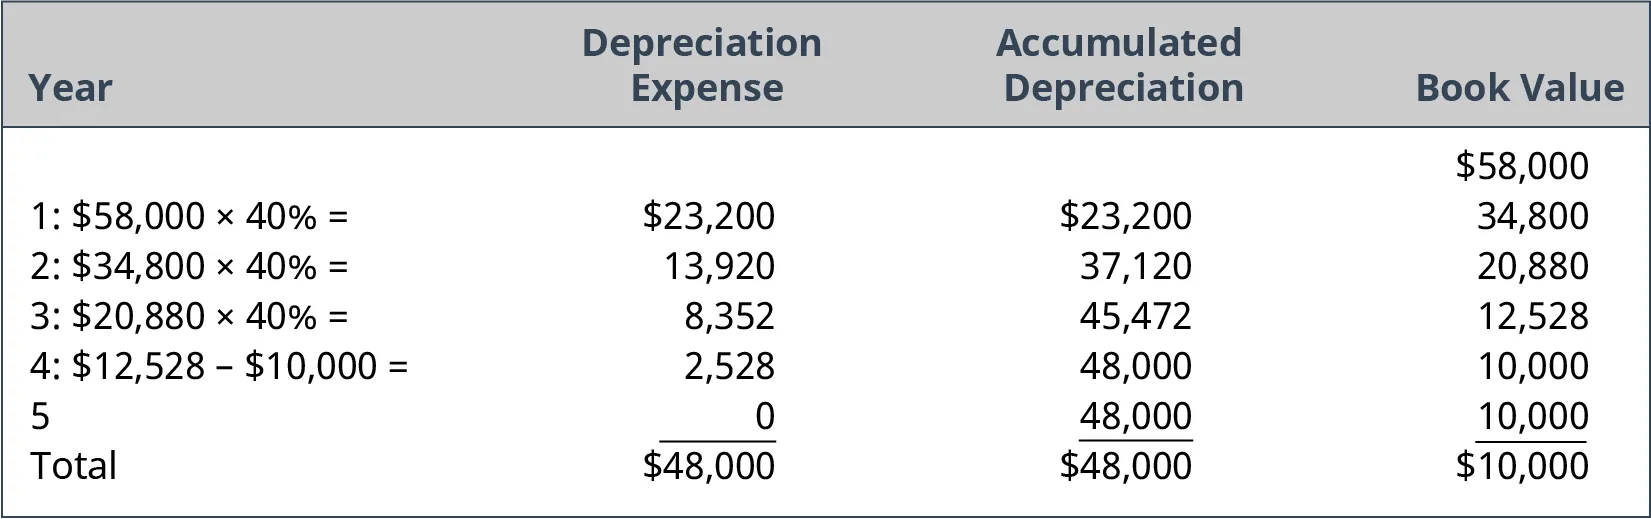 Depreciation Expense, Accumulated Depreciation, and Book Value, Years 1-5. It shows the depreciation expense at 40% per annum accumulating to $48,000 in 5 years. The accumulated depreciation is accumulated from $23,200 in year 1 to $48,000 in year 5, and the book value reduces from $58,000 in year 1 to $10,000 in year 5.